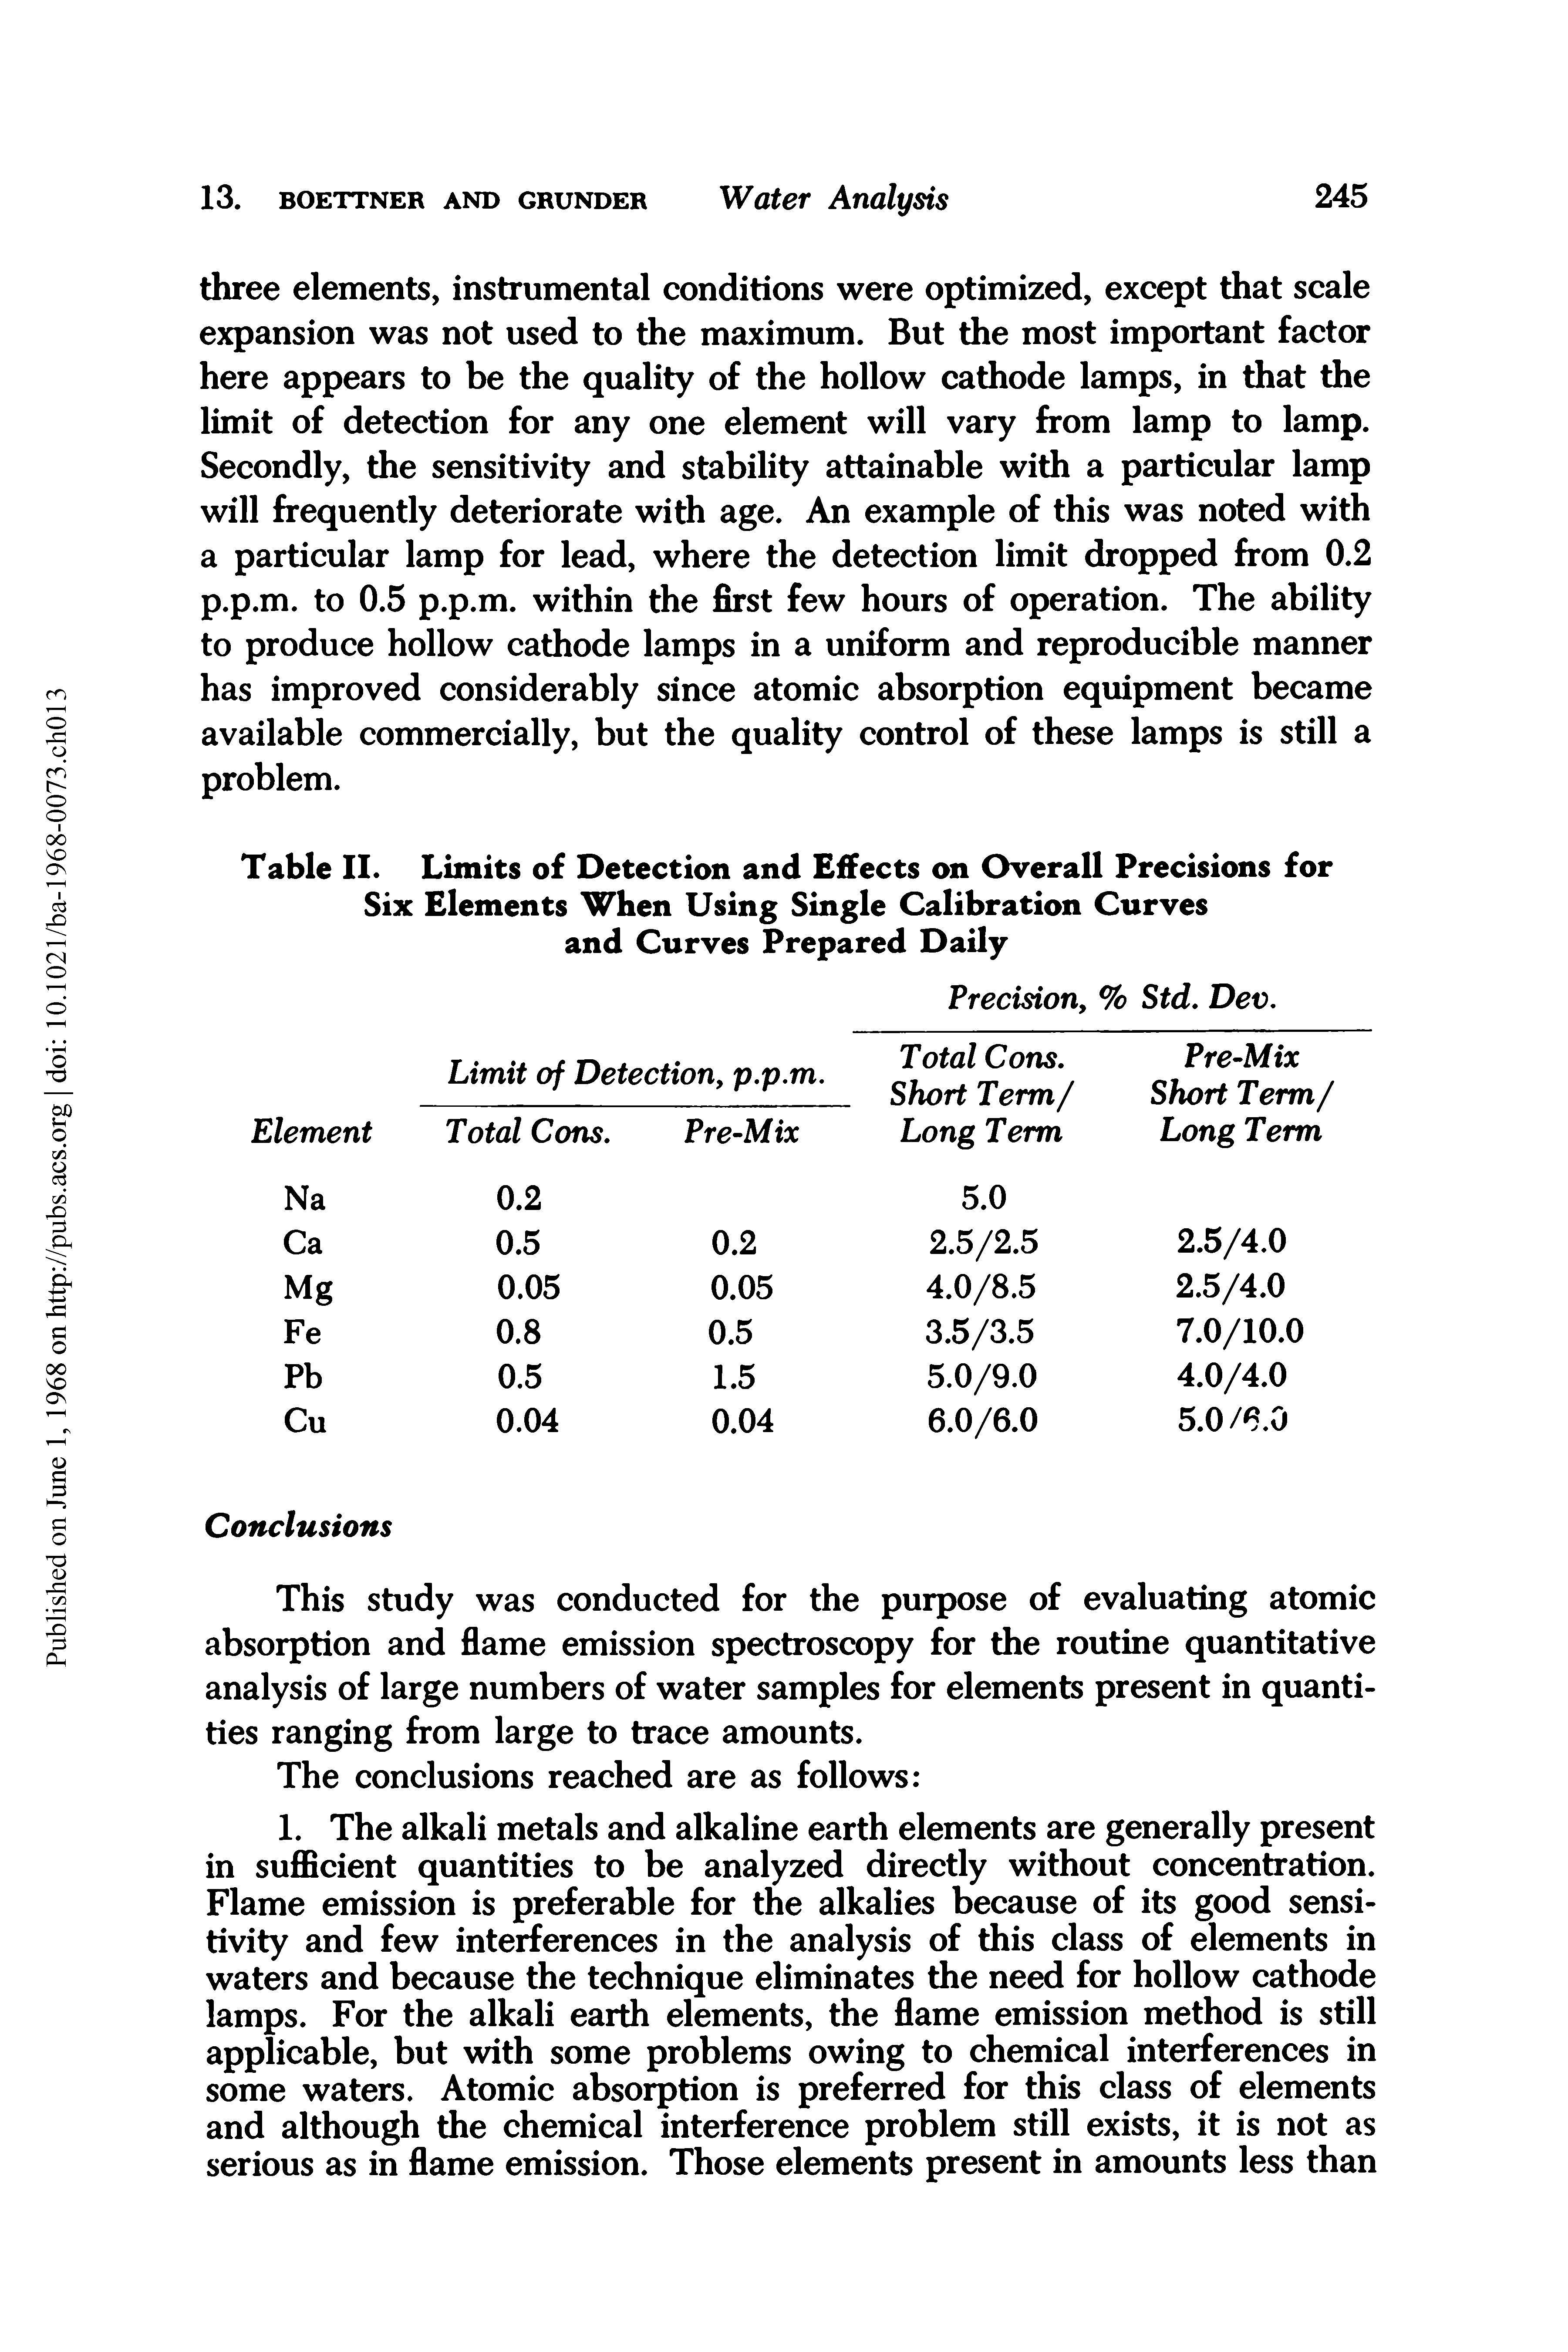 Table II. Limits of Detection and Effects on Overall Precisions for Six Elements When Using Single Calibration Curves and Curves Prepared Daily...